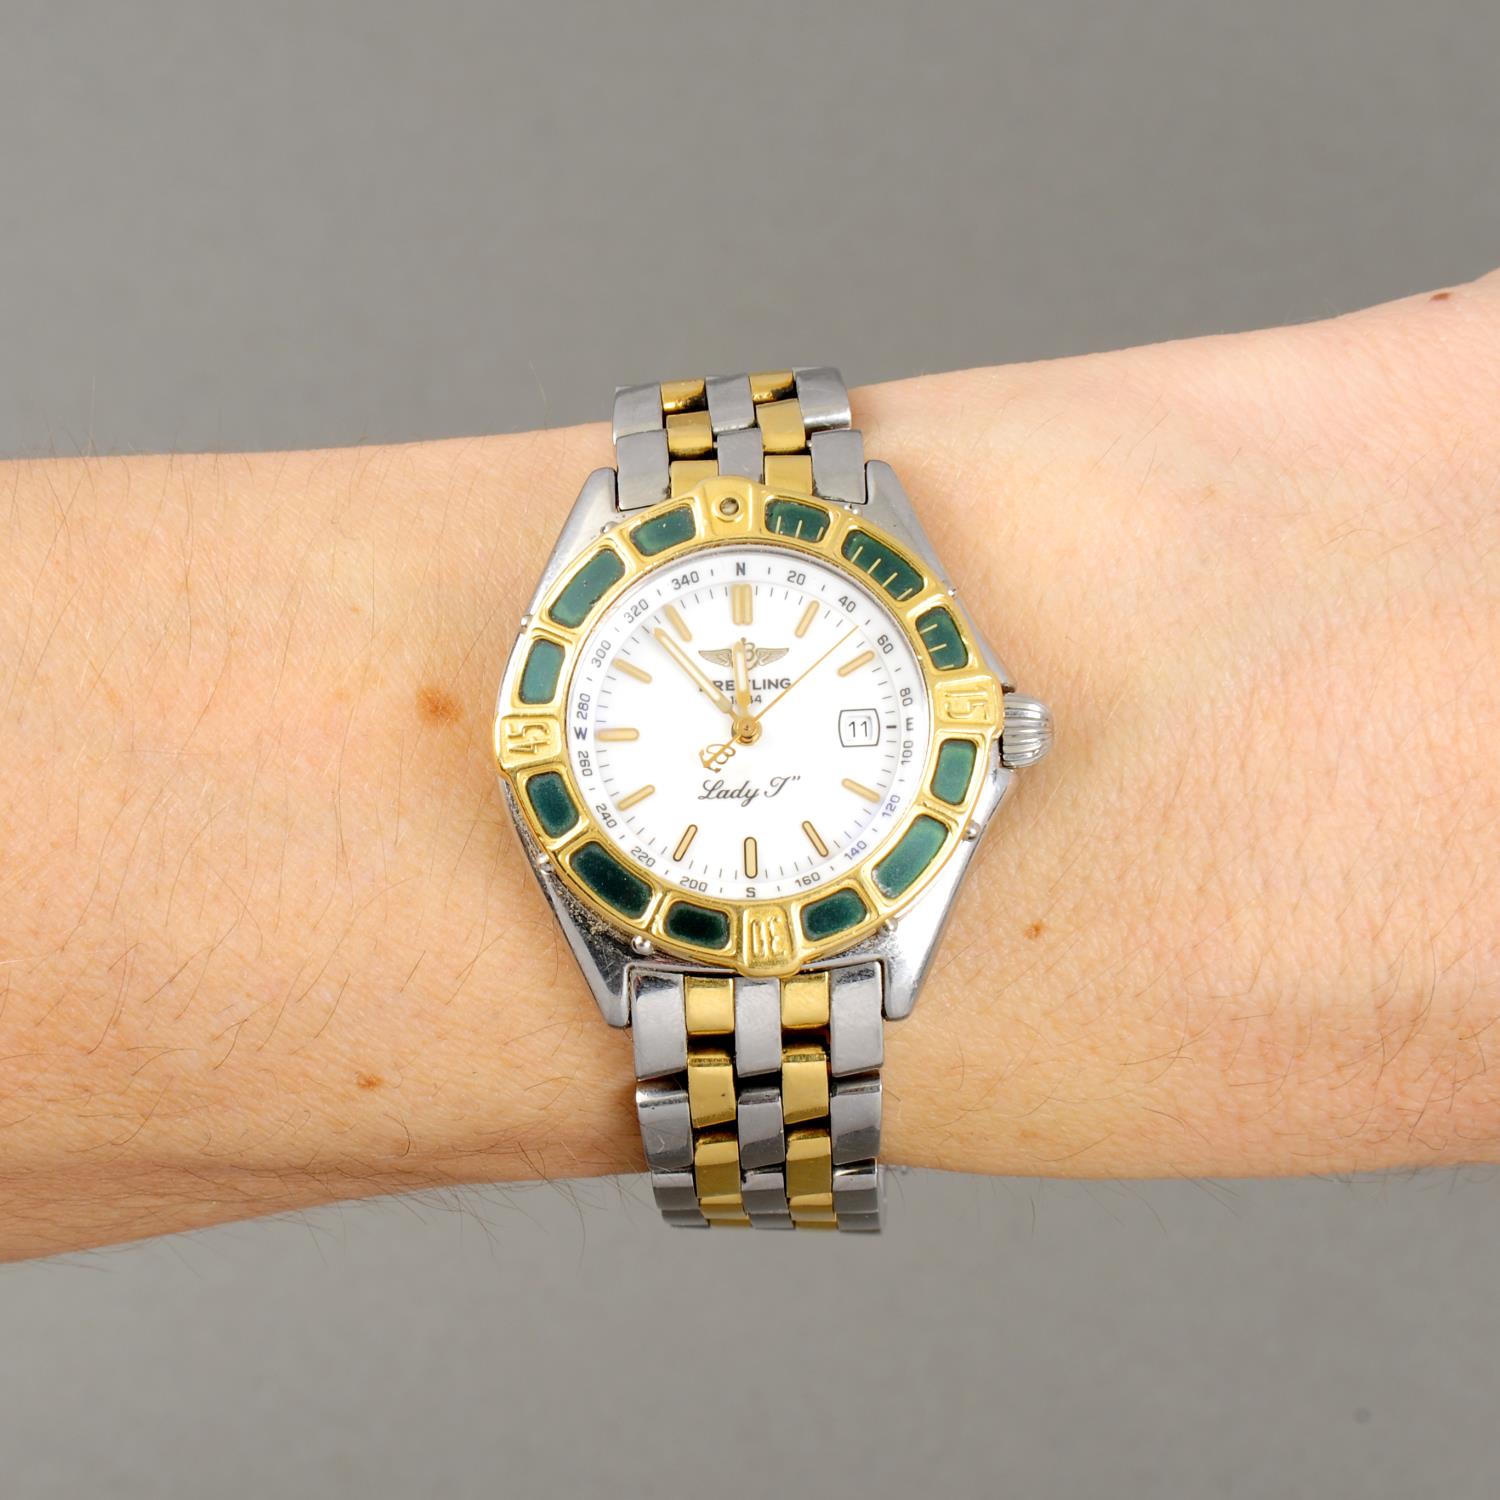 BREITLING - a lady's Lady J bracelet watch. Stainless steel case with yellow metal calibrated bezel. - Image 3 of 5